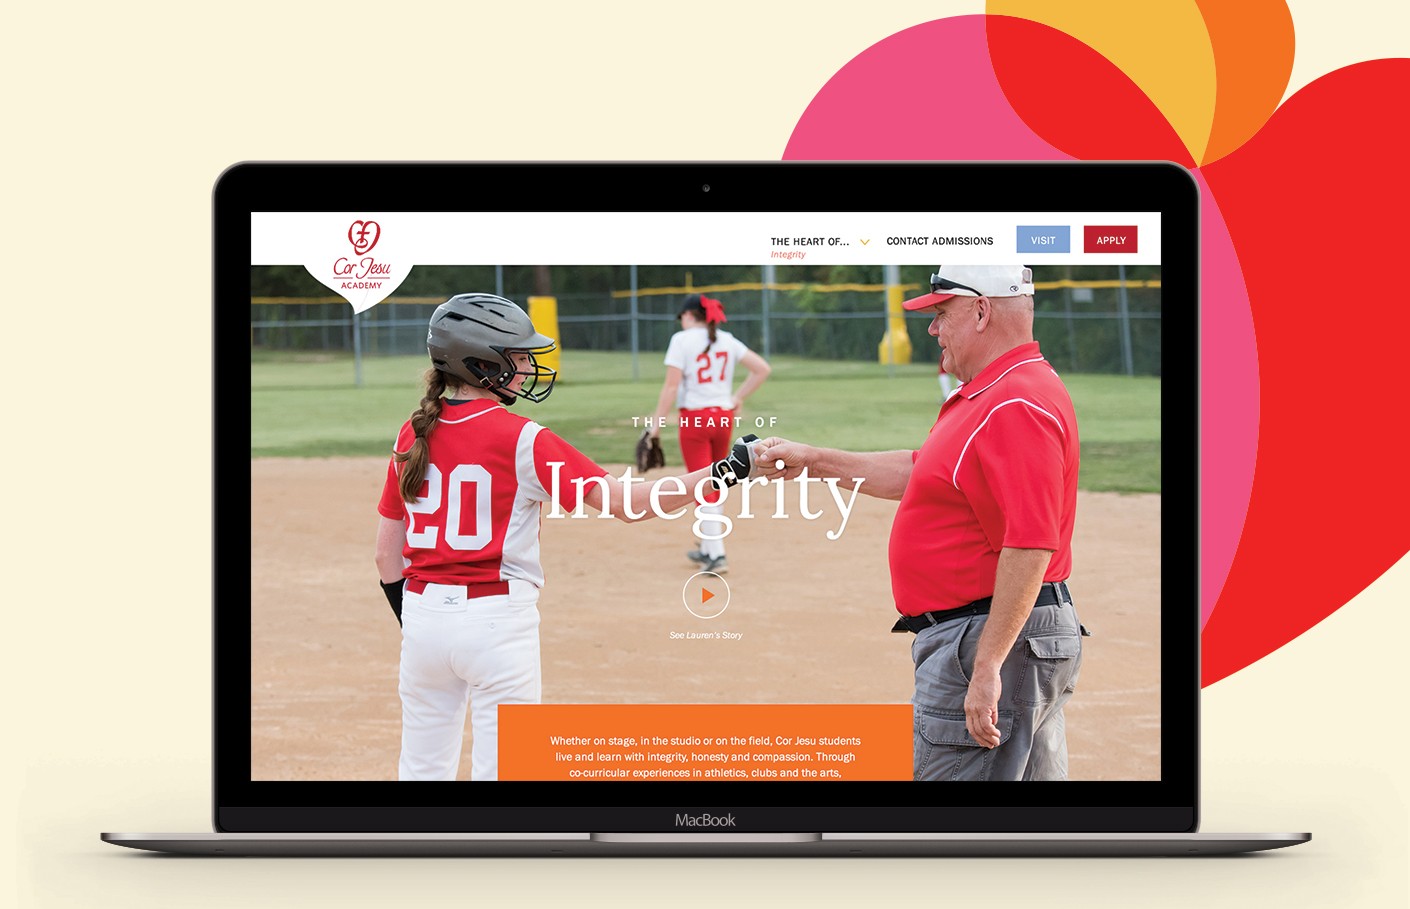 The Cor Jesu microsite features five core values, including Integrity featured here.